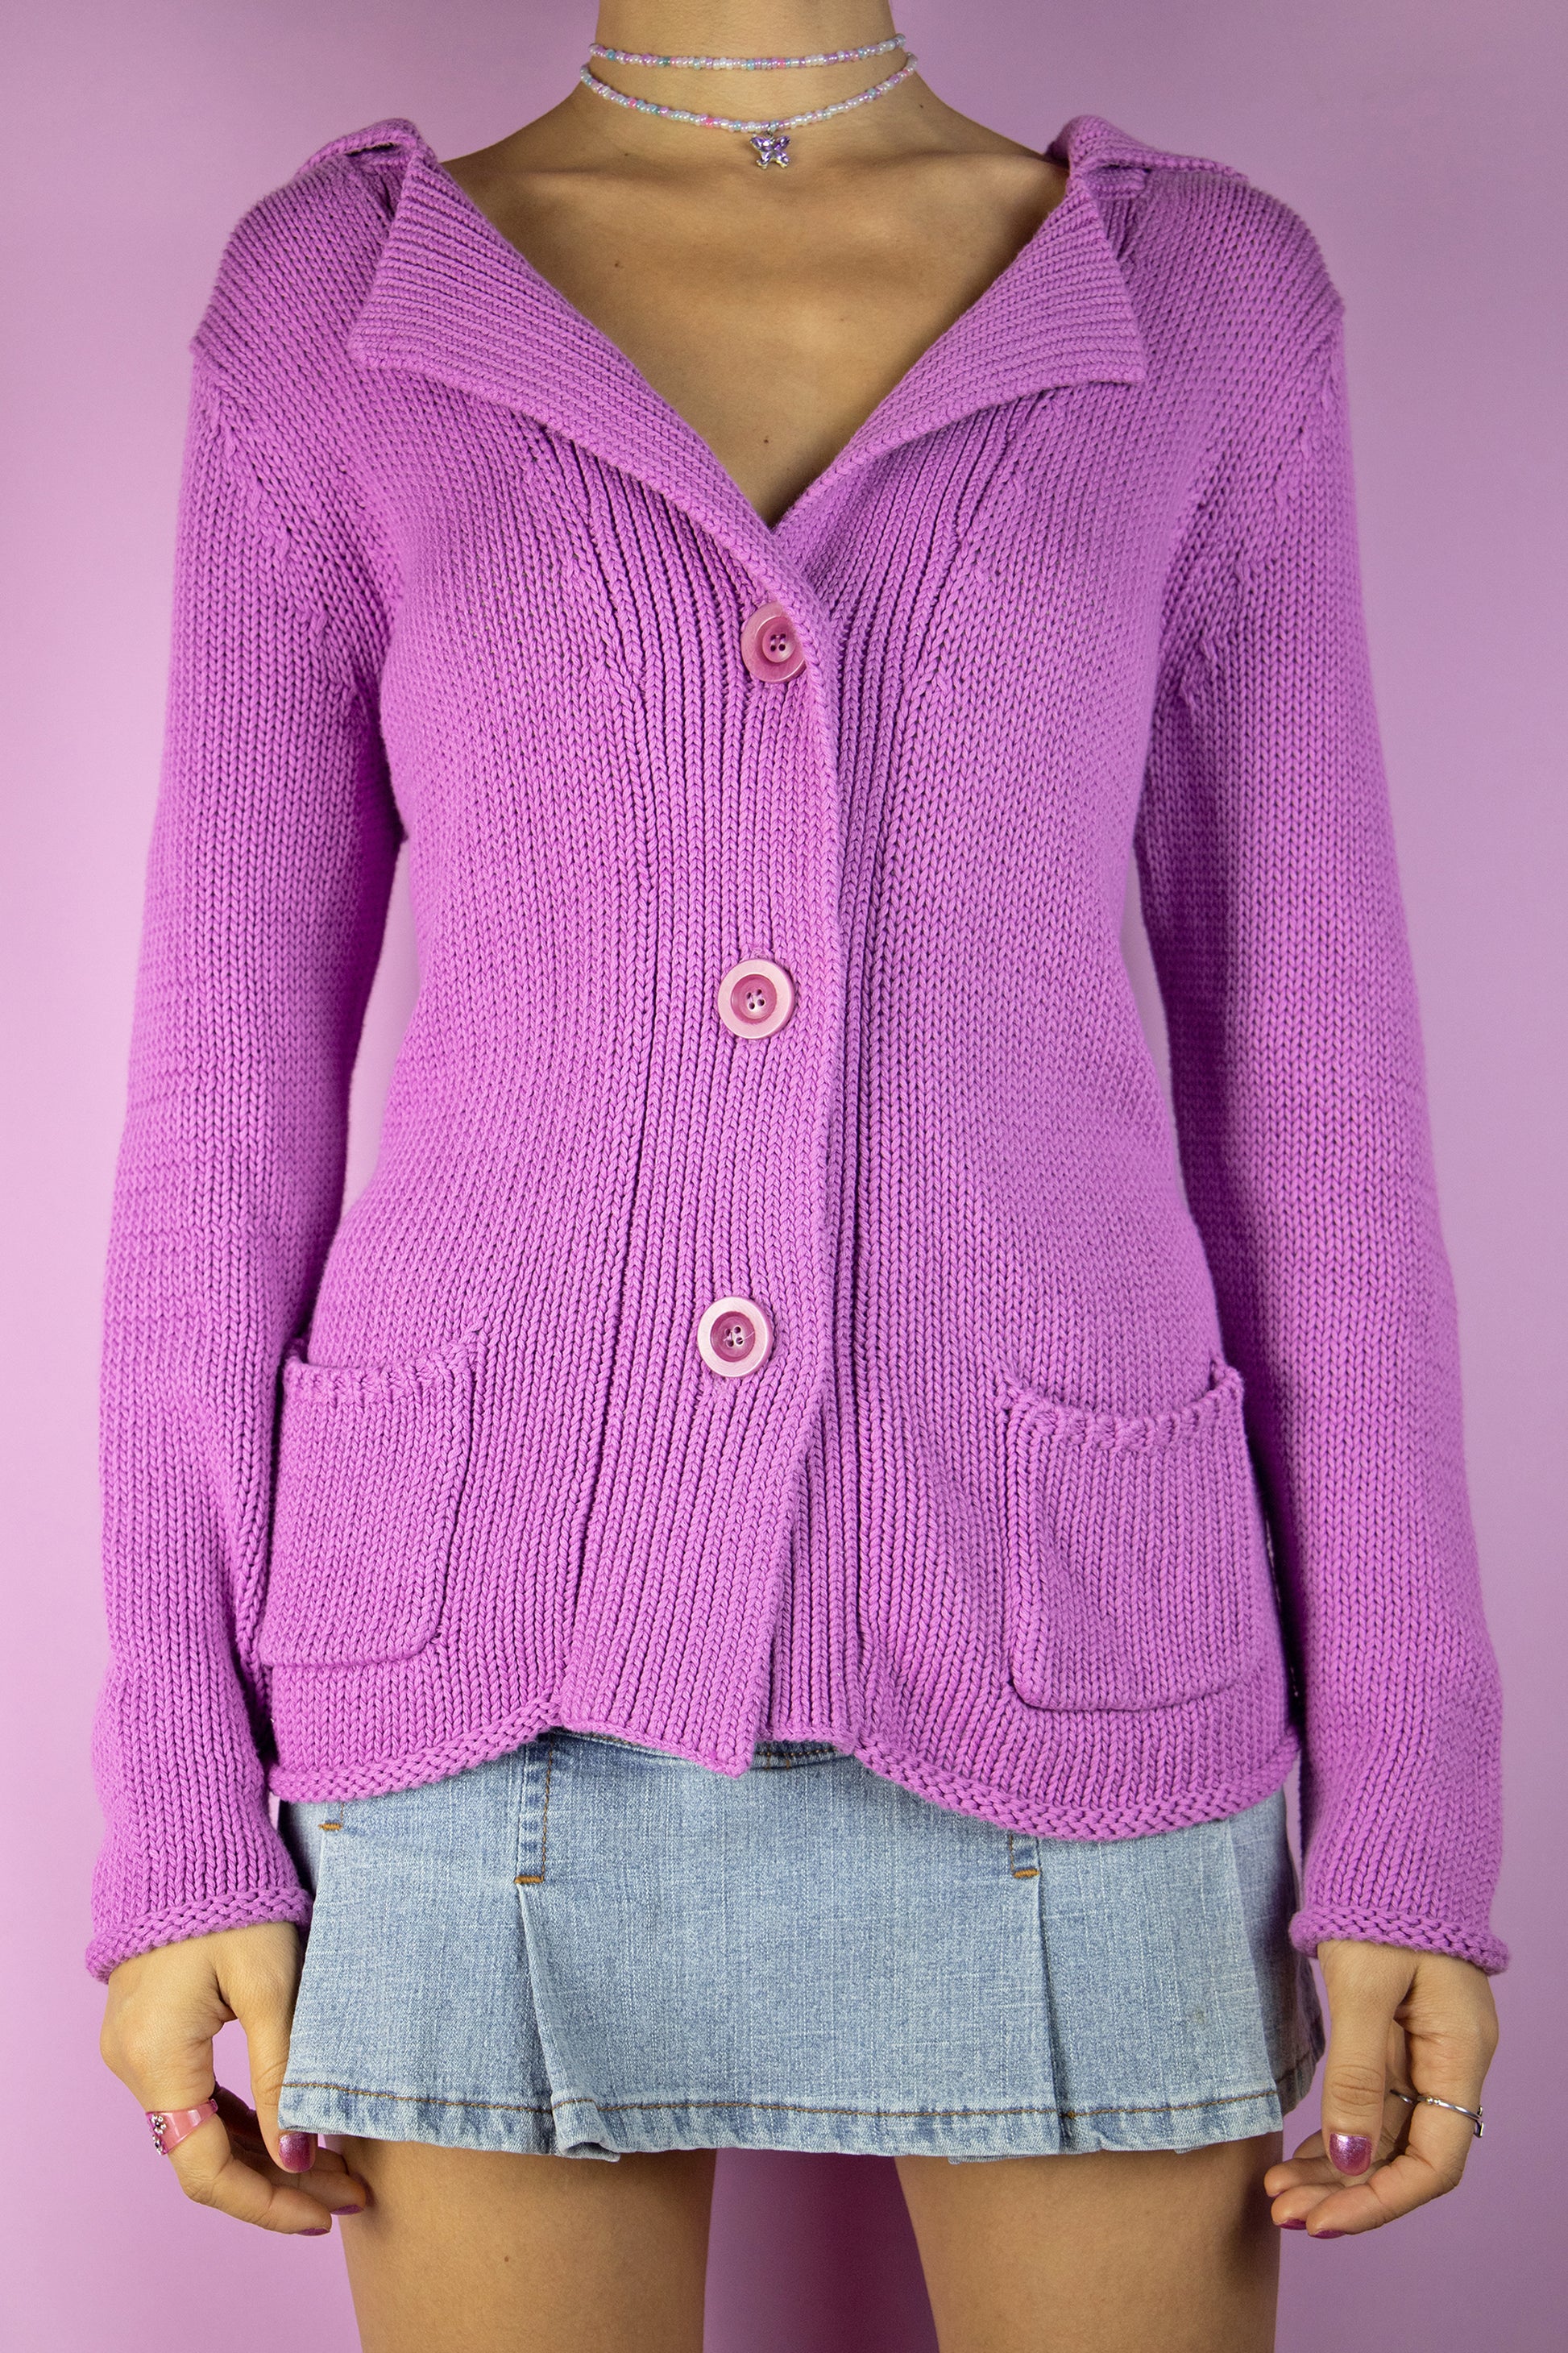 The Vintage Y2K Pink Lilac Knit Cardigan is a lovely cyber boho sweater from the 2000s, featuring a pastel purple lilac pink chunky knit, collar, buttons, and pockets.